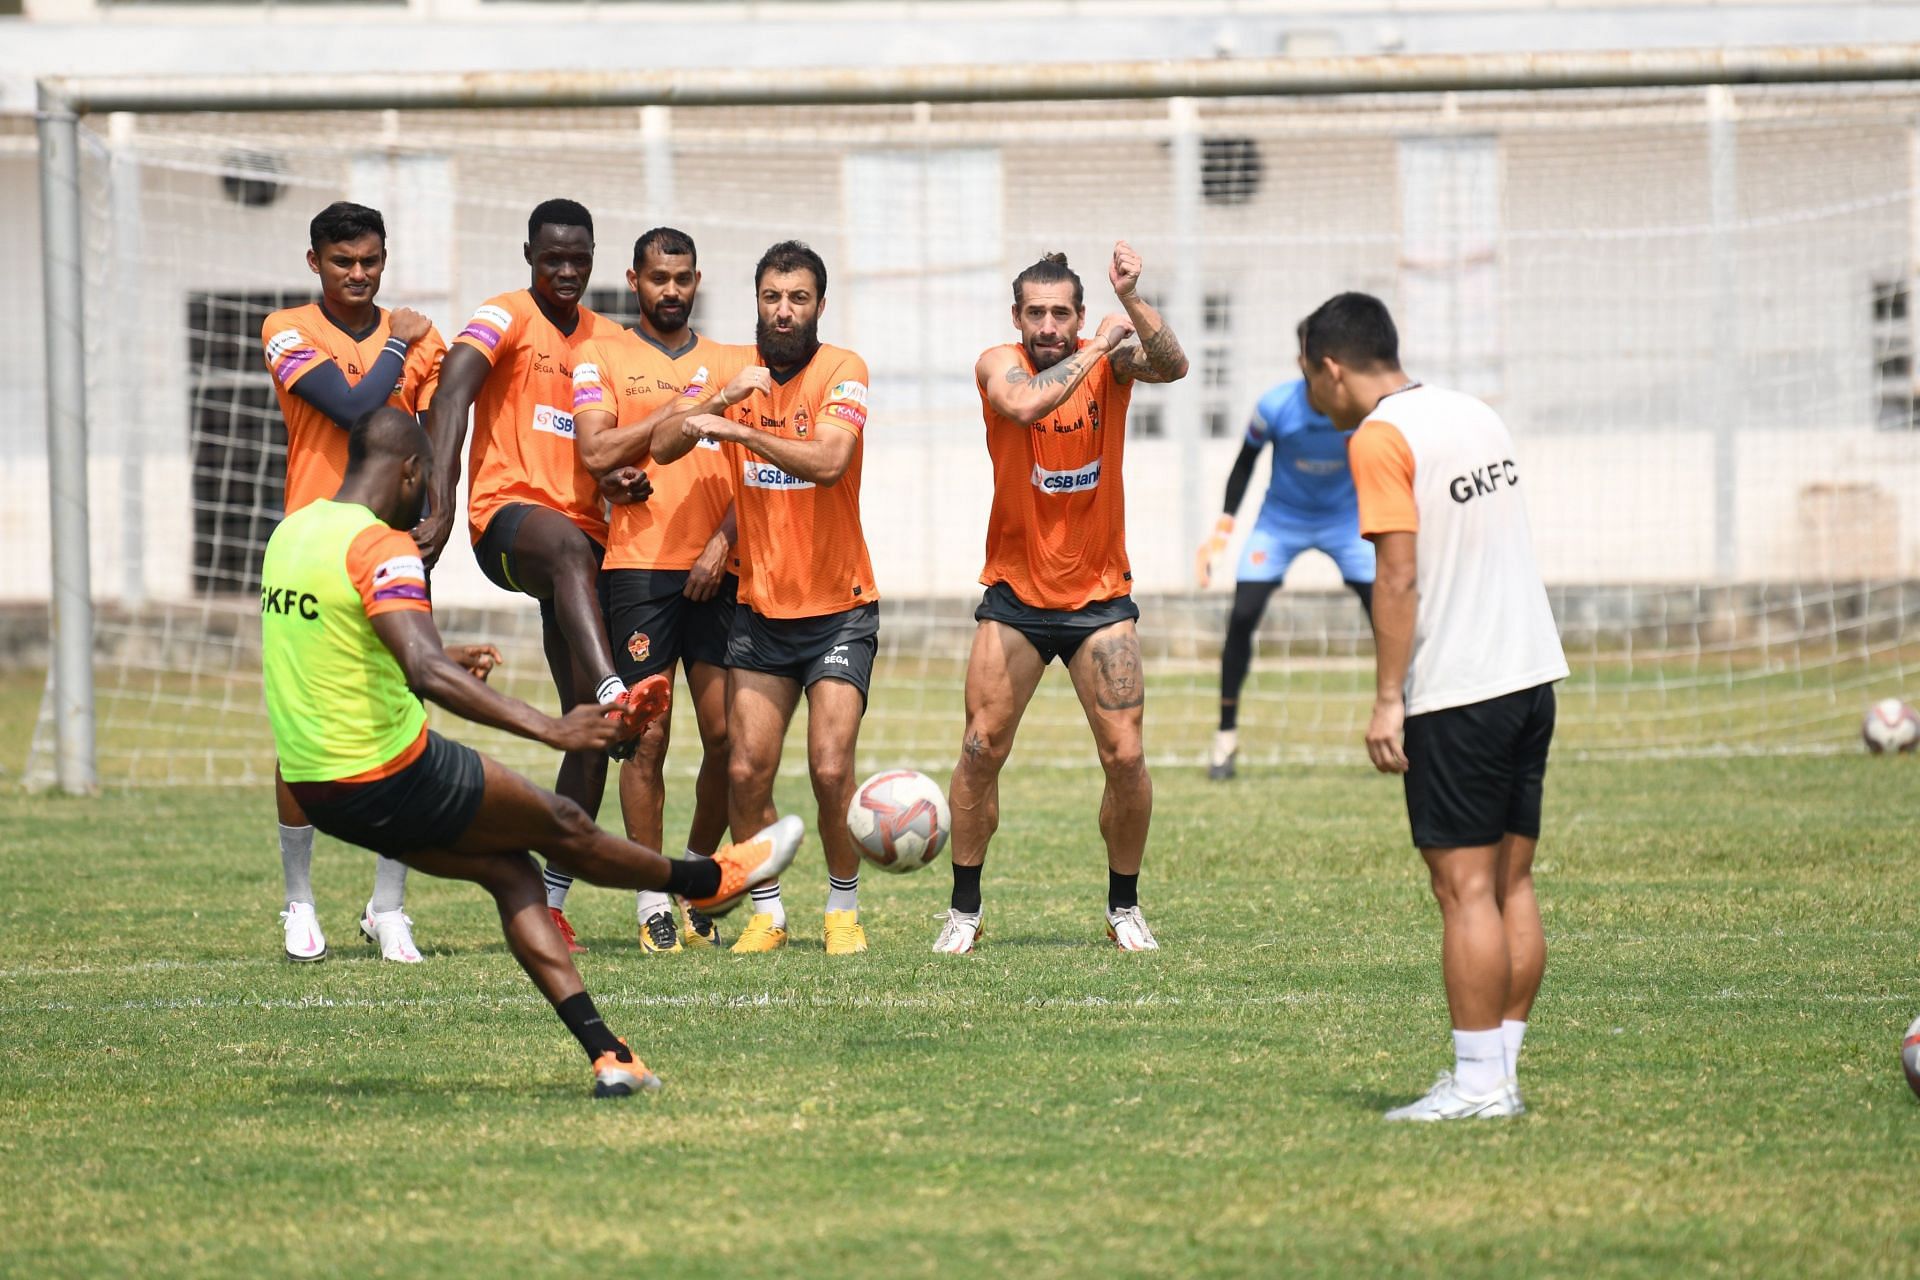 Gokulam Kerala FC player takes a free-kick during their training session - Image Courtesy: I-League Twitter